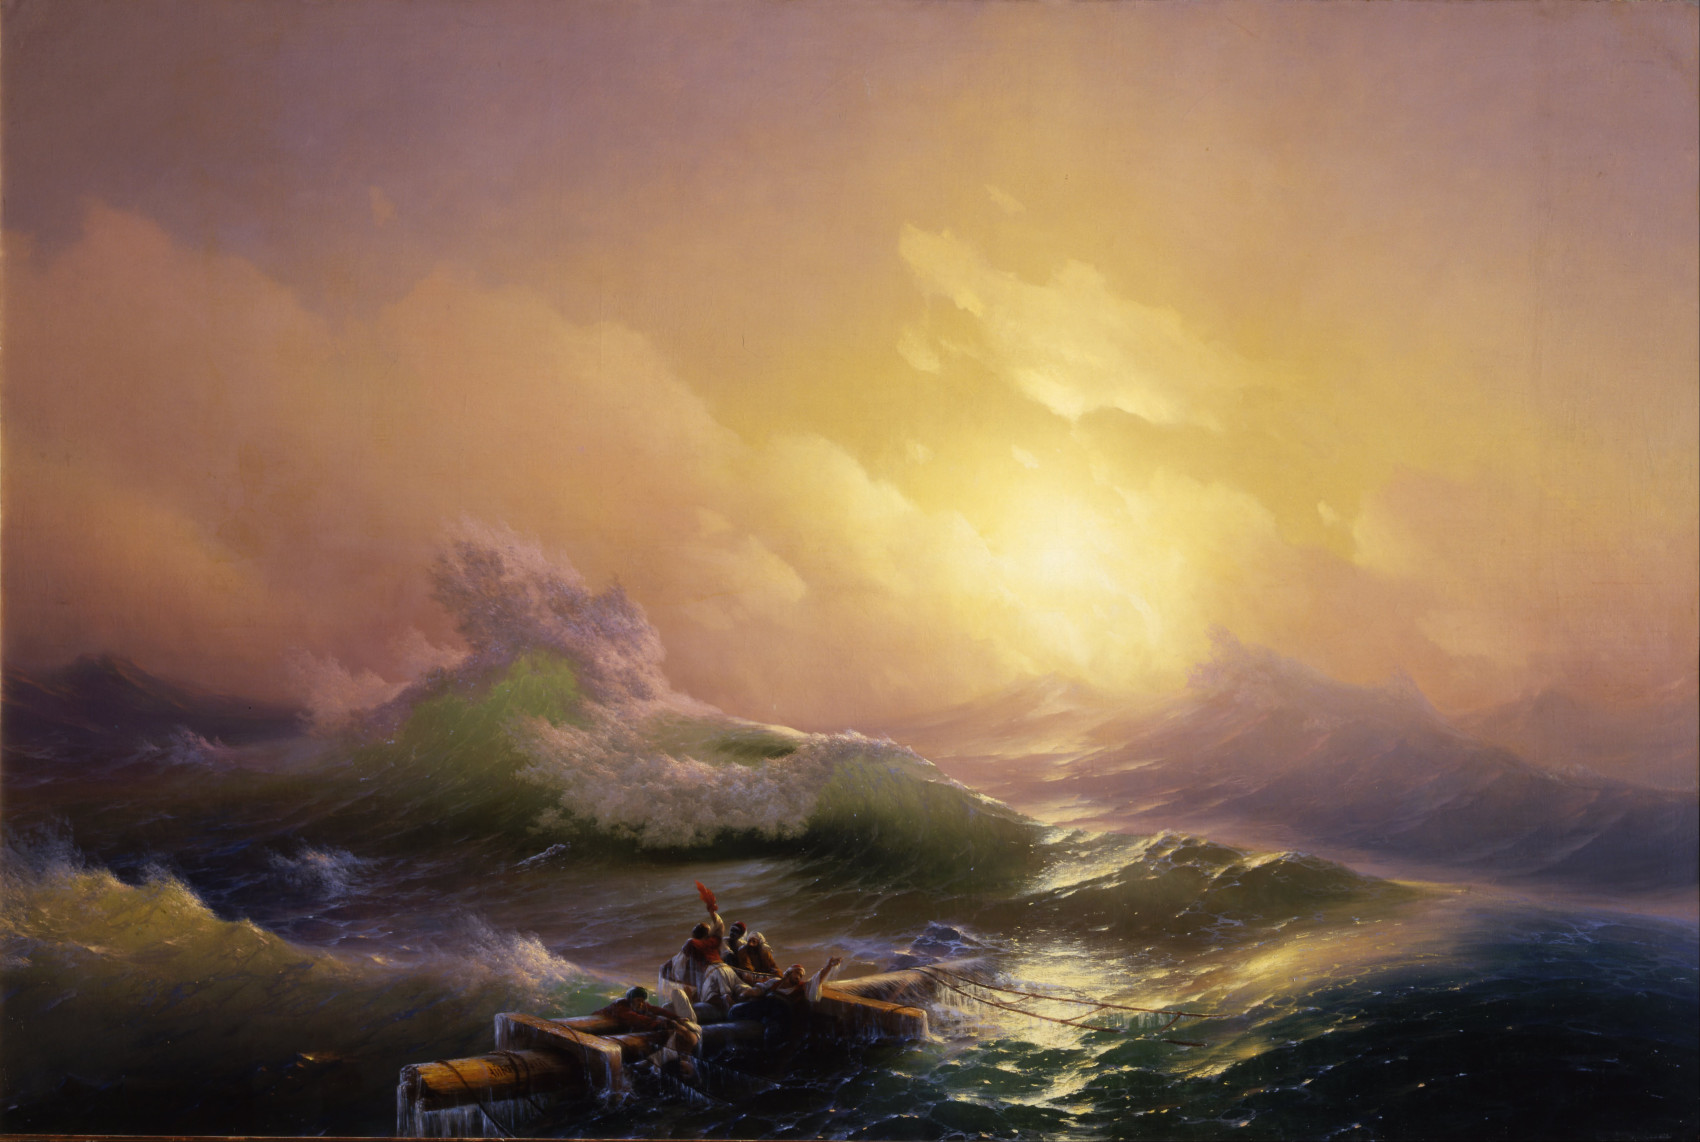 Aivazovsky, I. (1850). The Ninth Wave [Oil-on-canvas]. State Russian Museum, St. Petersburg, RU.